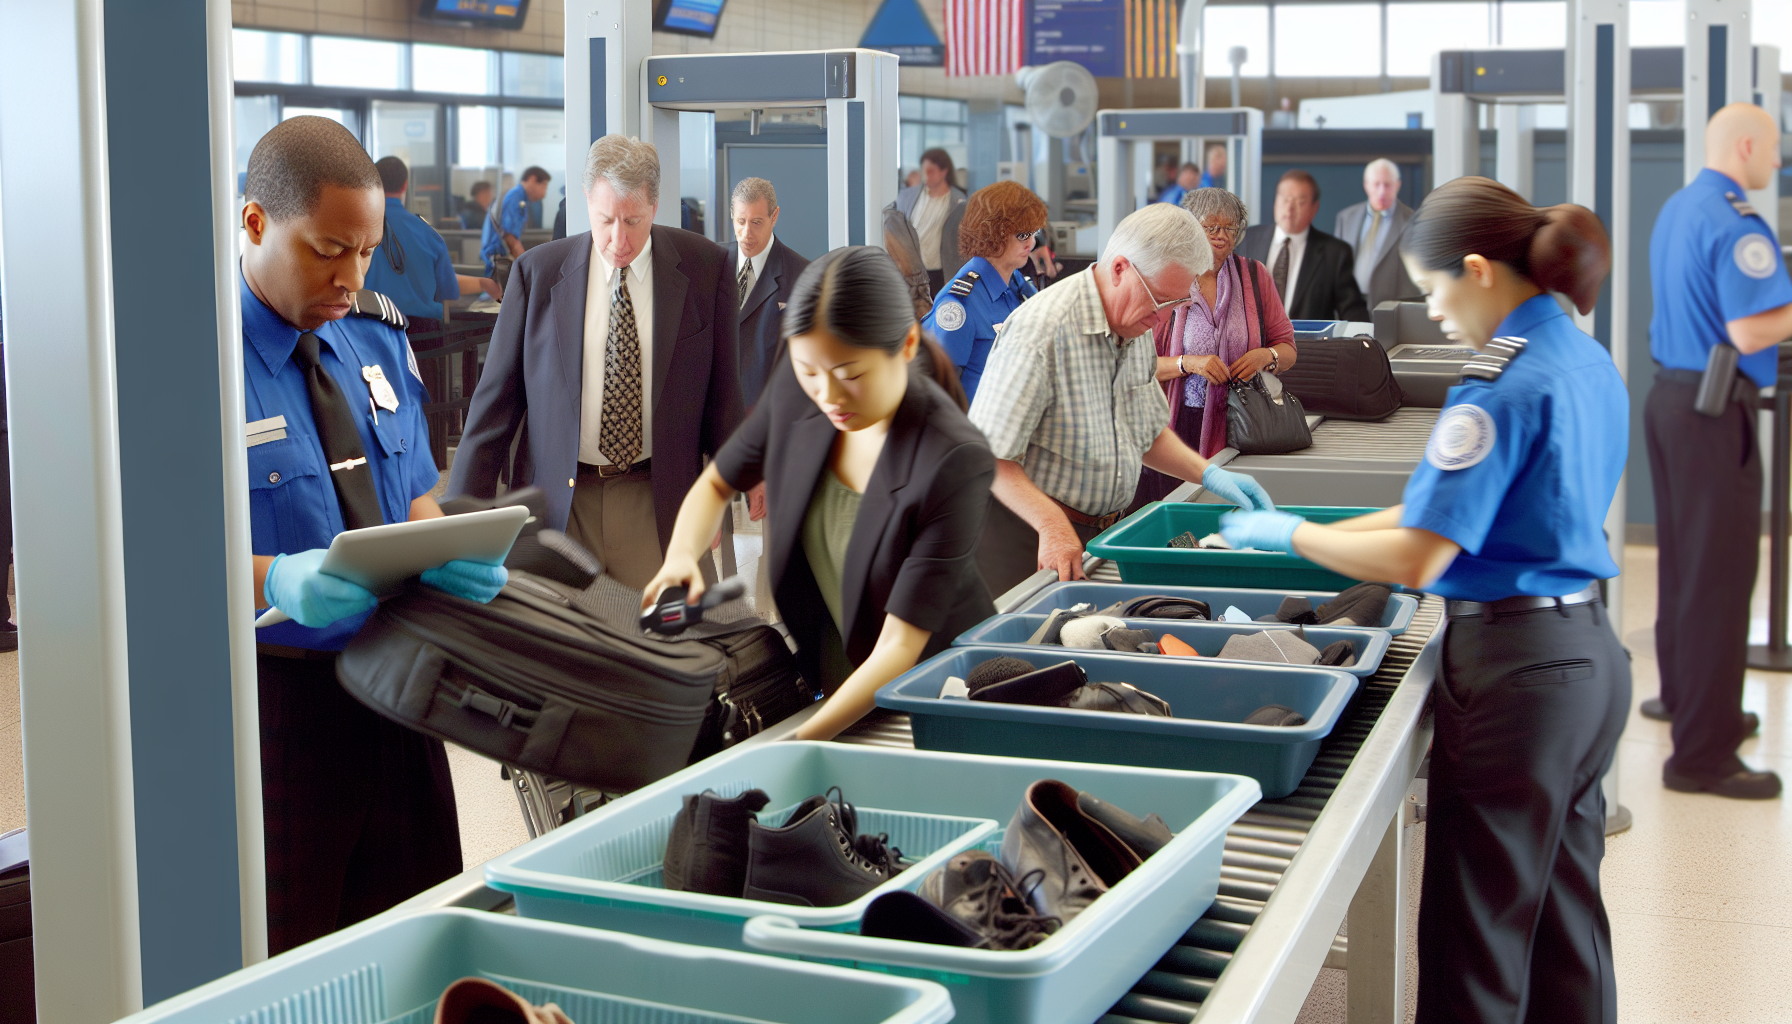 People going through airport security checkpoint